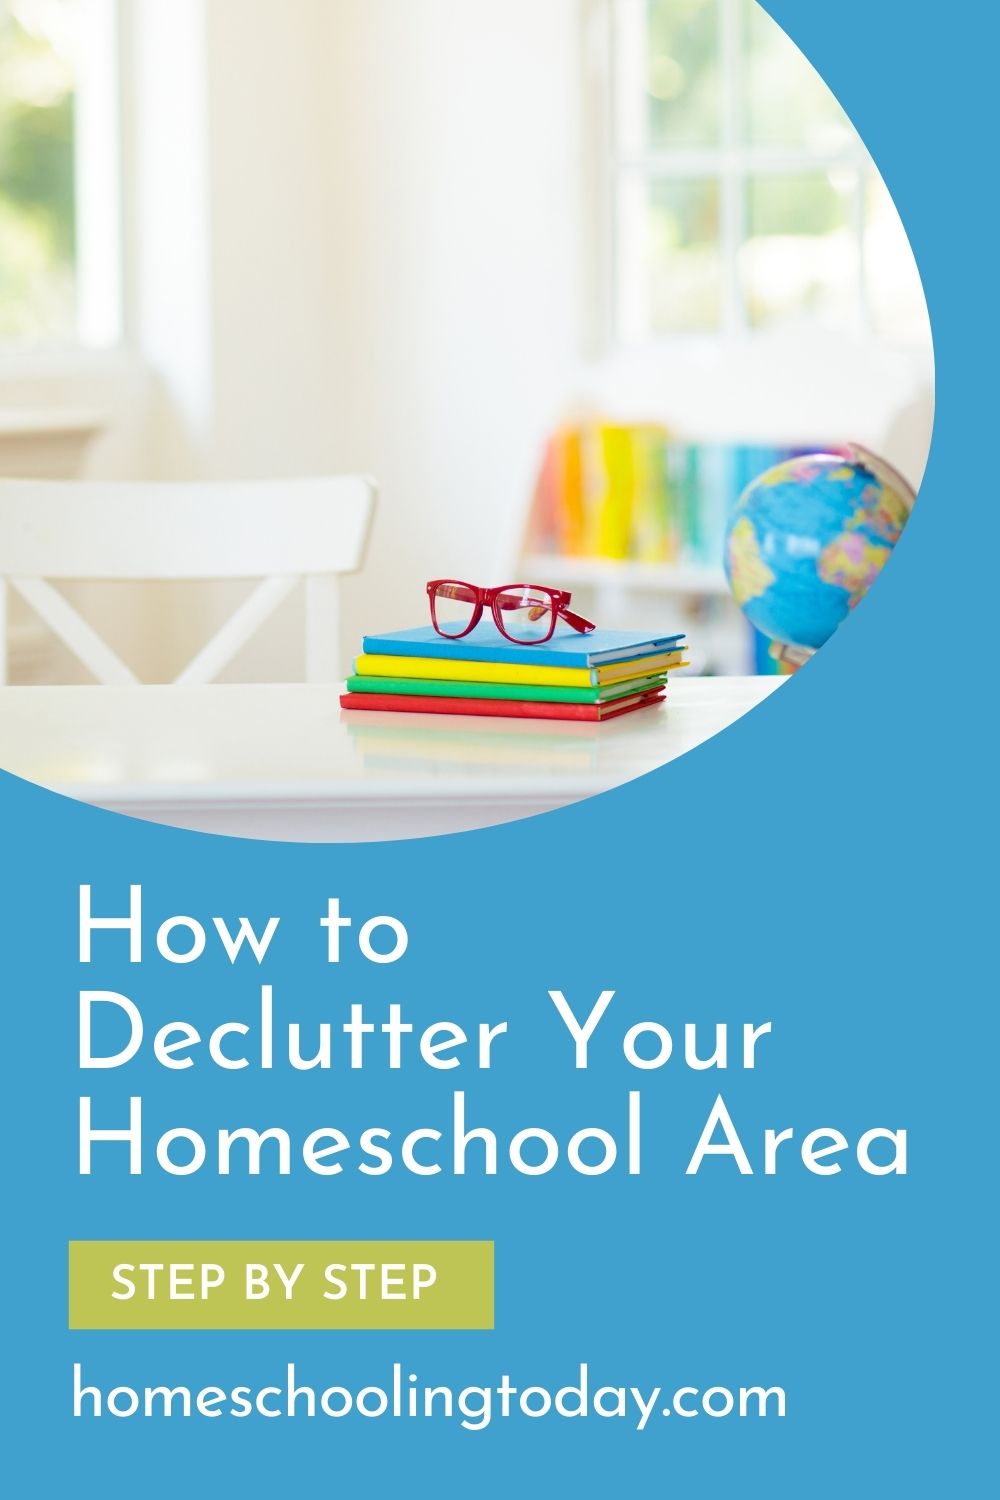 Pinterest image for how to declutter your homeschool area